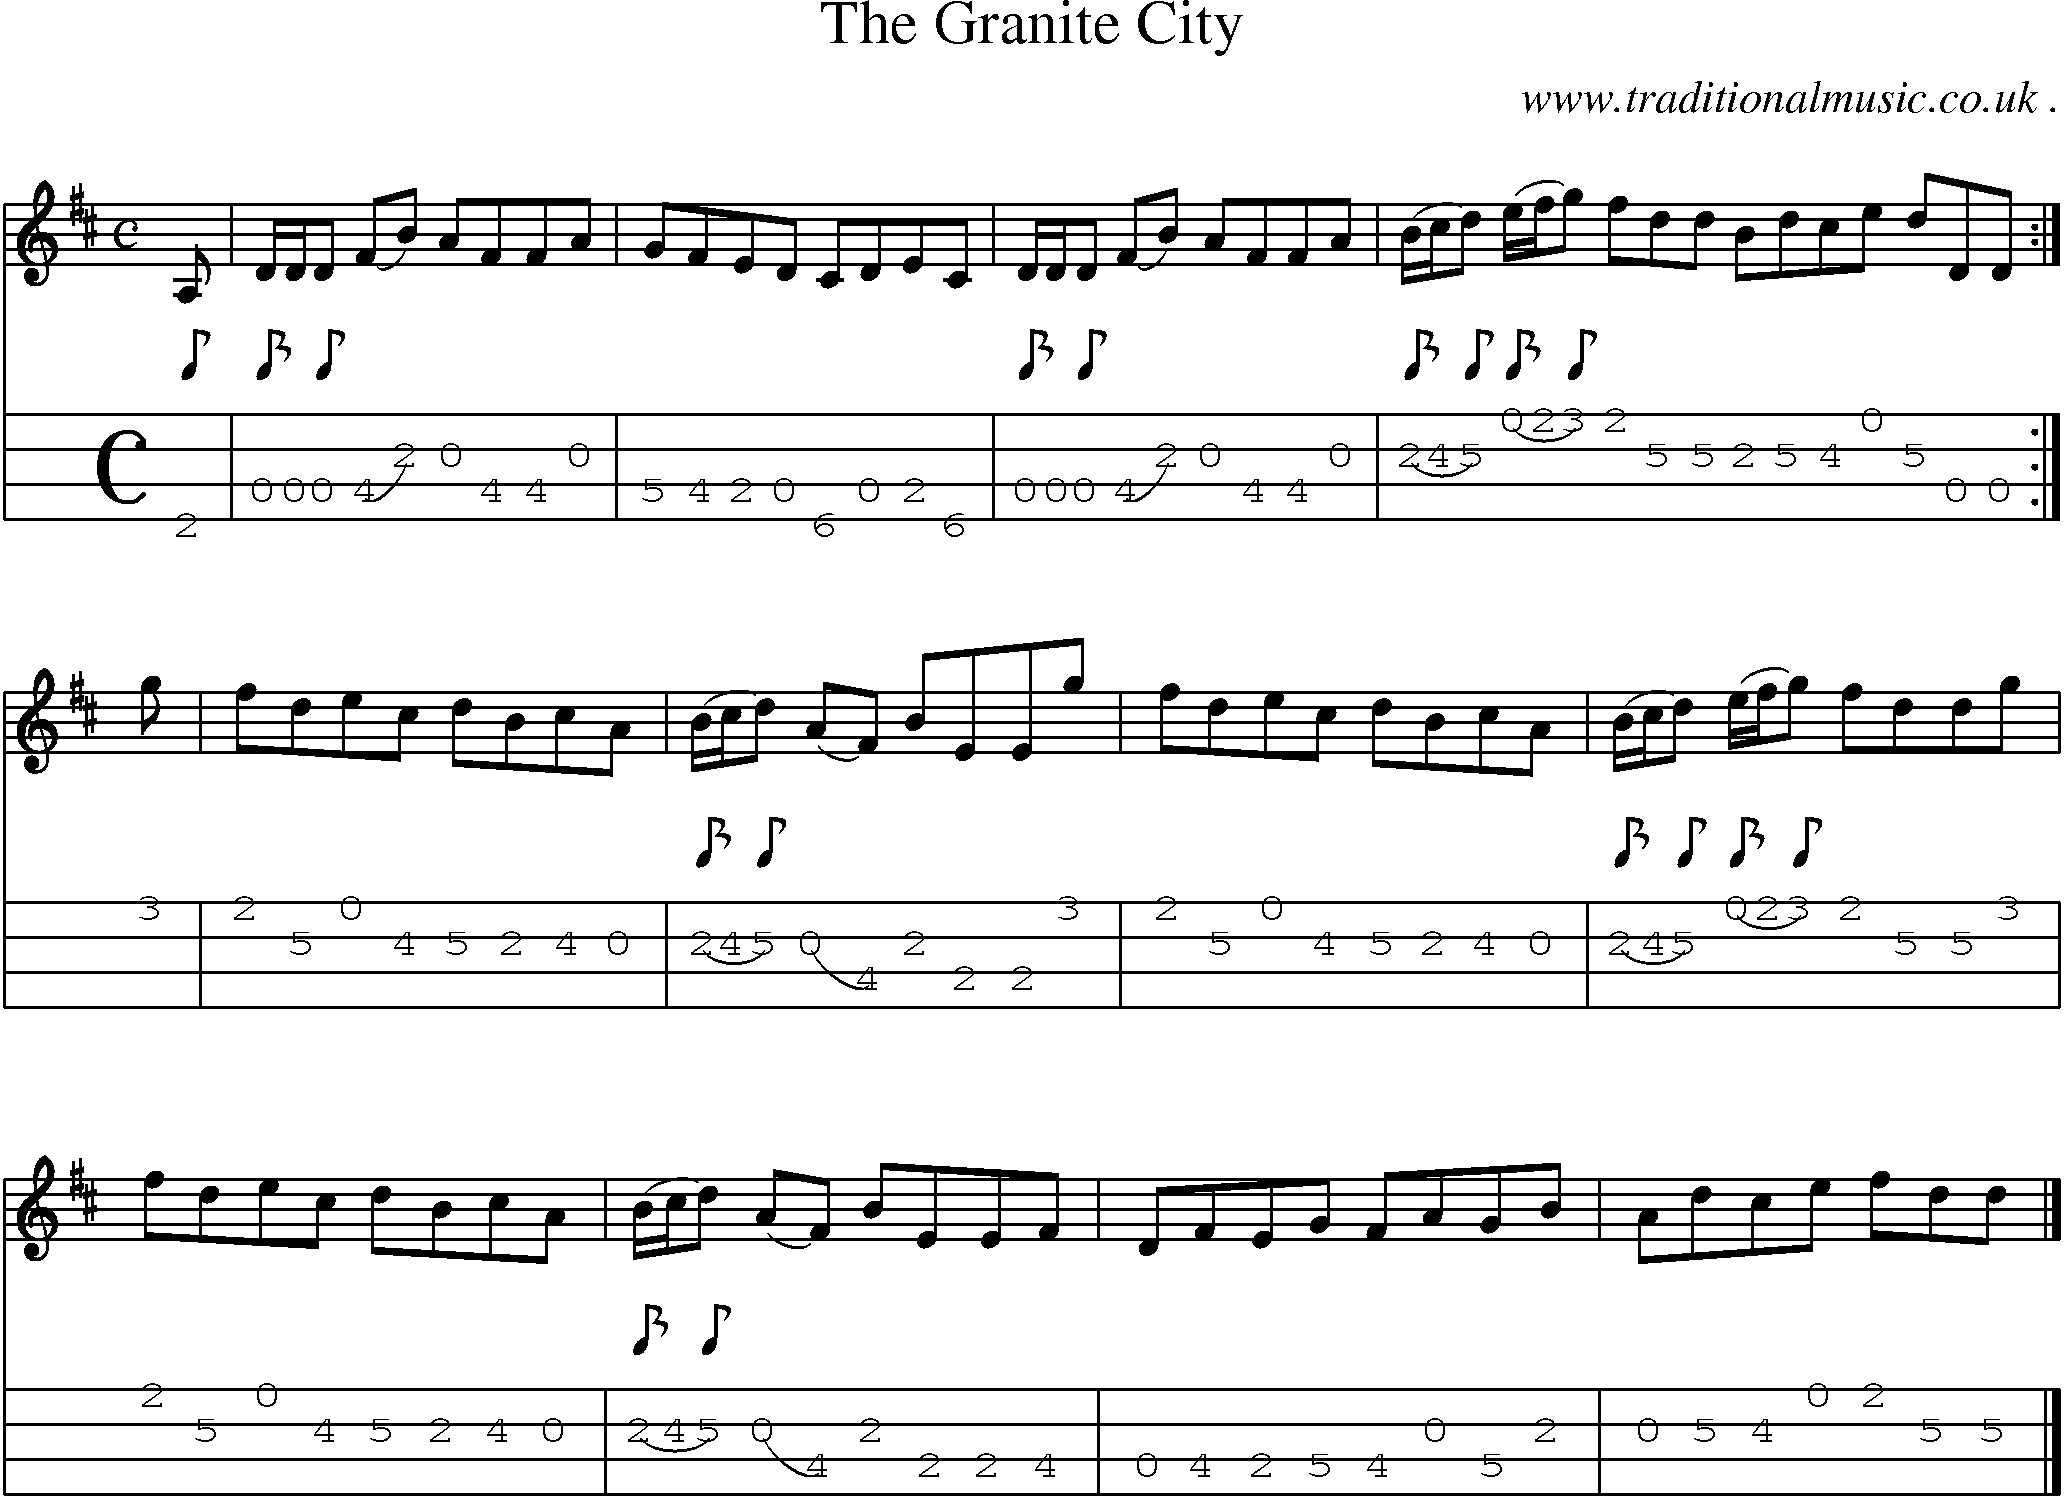 Sheet-music  score, Chords and Mandolin Tabs for The Granite City